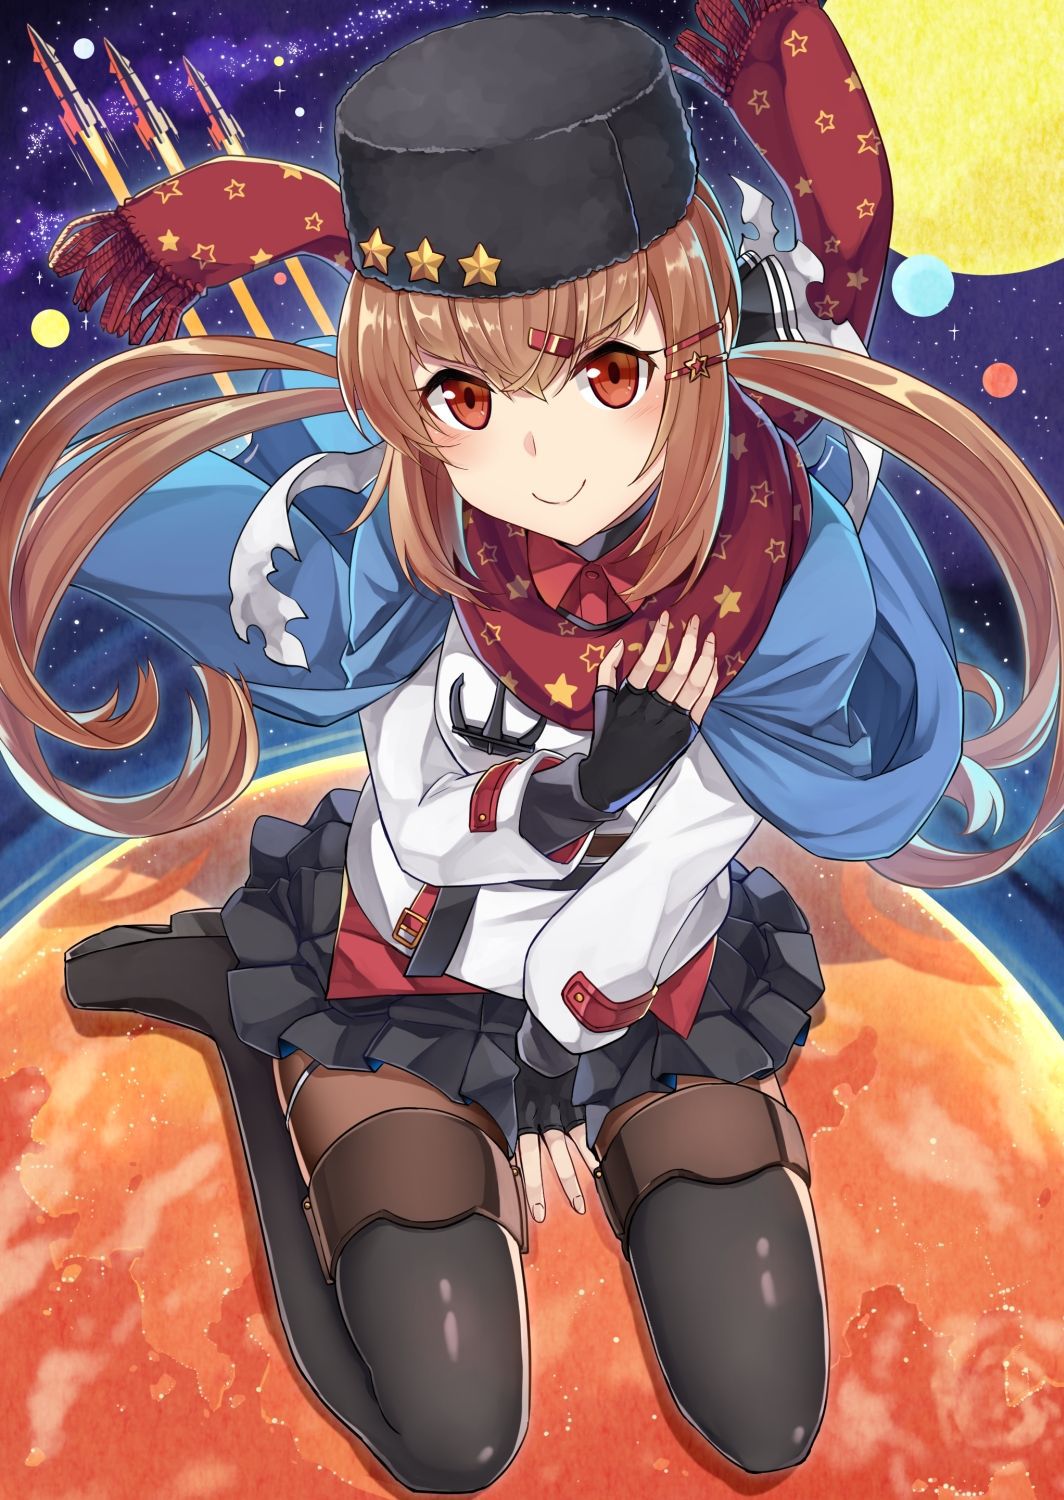 Kantai Photo Gallery people want to see! 13